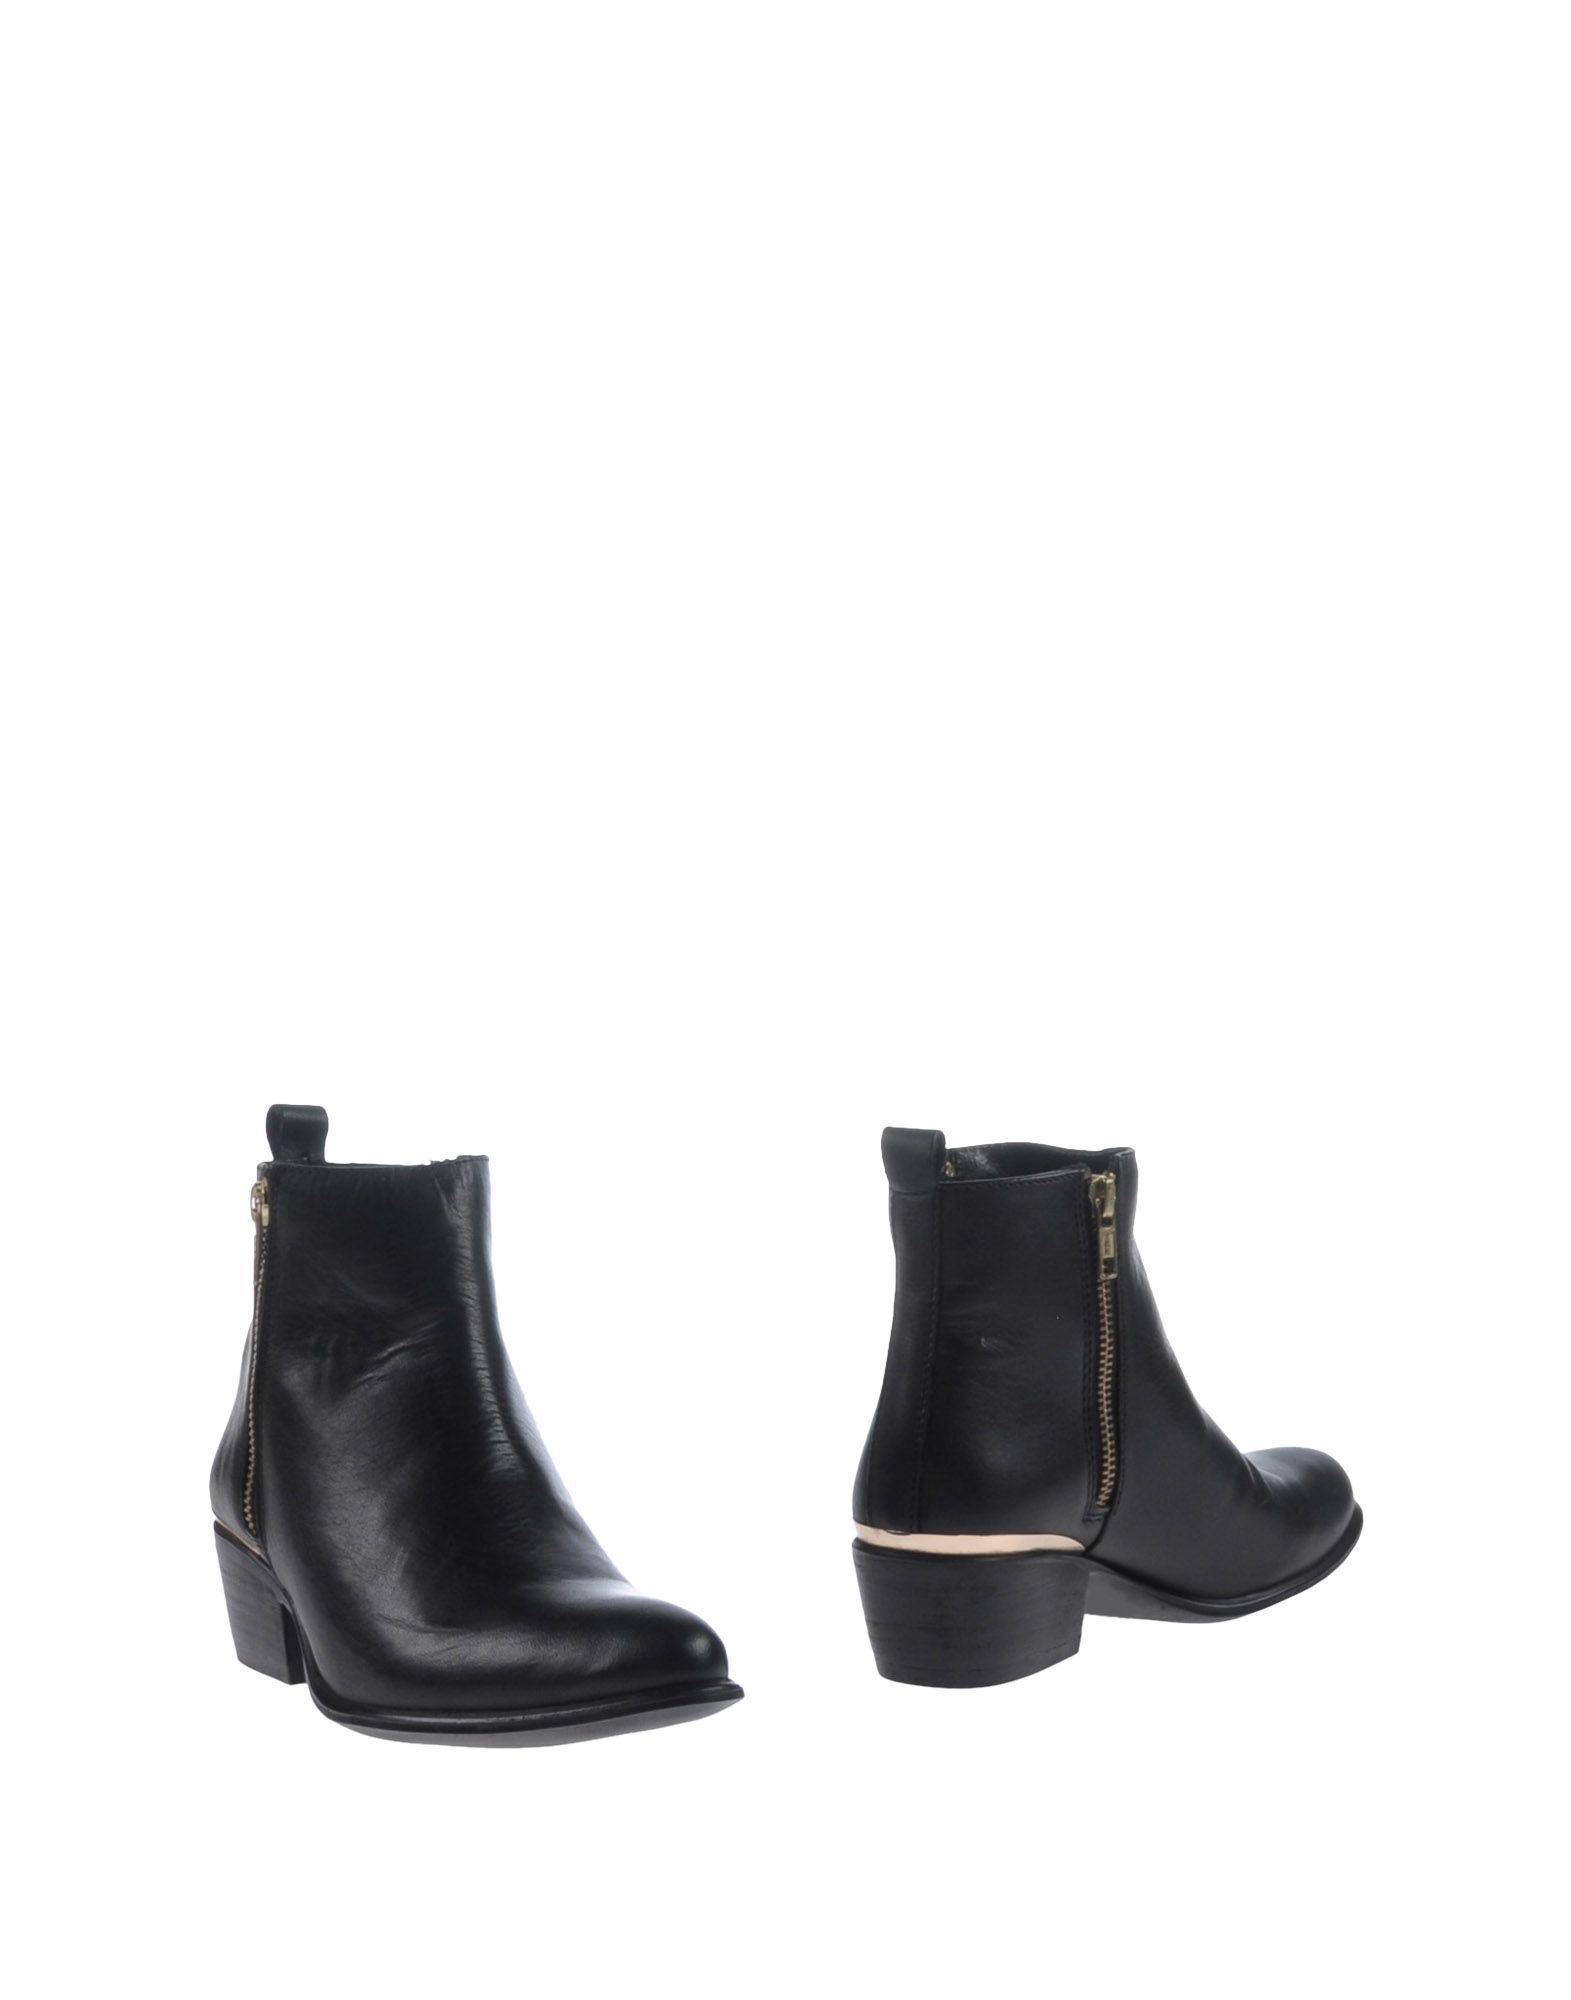 STEVE MADDEN Ankle boots | YOOX (US)